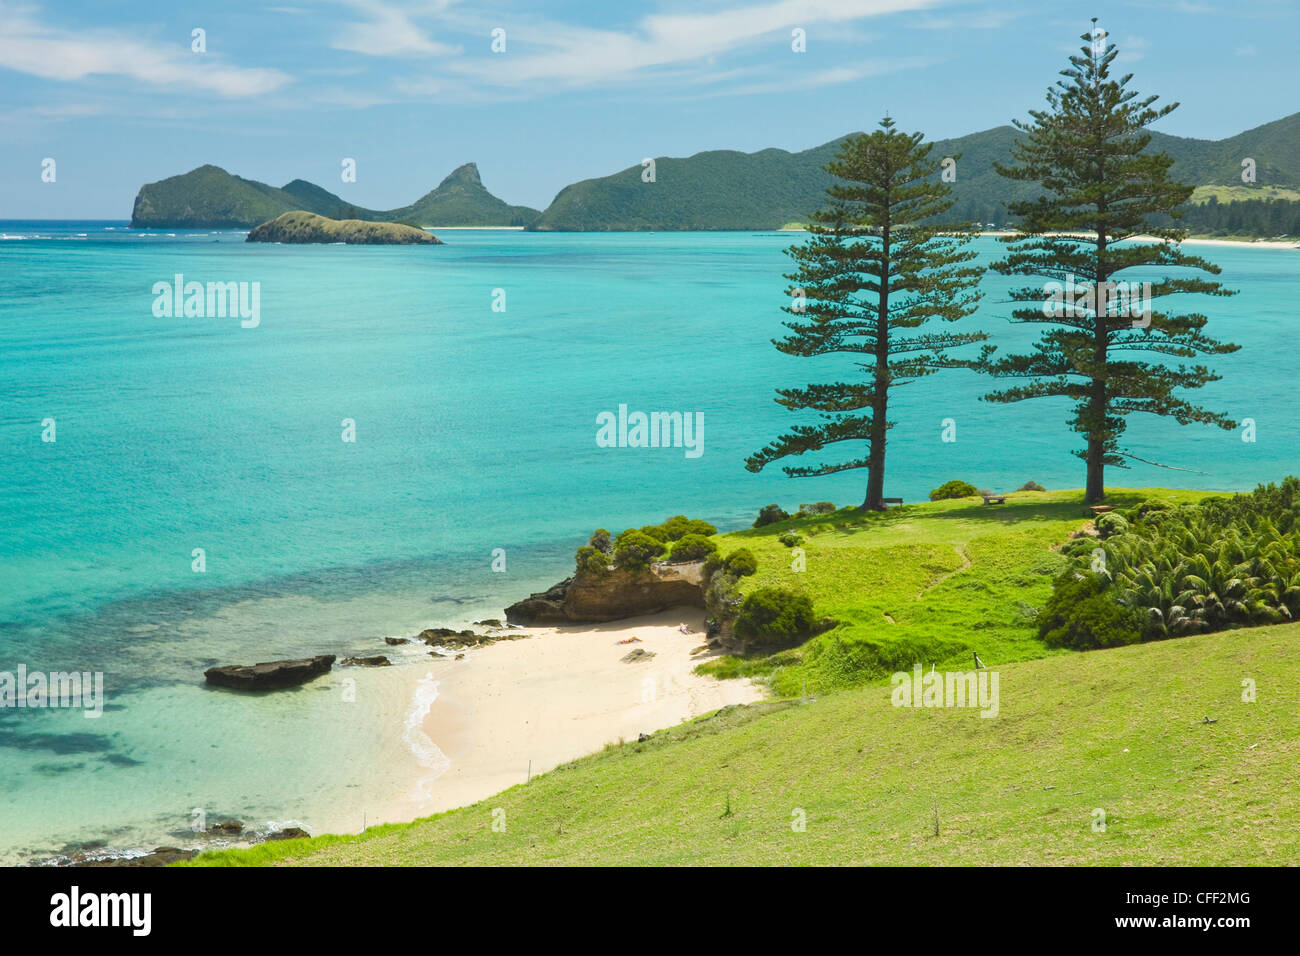 Looking north to Lover's Bay on this 10km long volcanic island in the Tasman Sea, Lord Howe Island, New South Wales, Australia Stock Photo